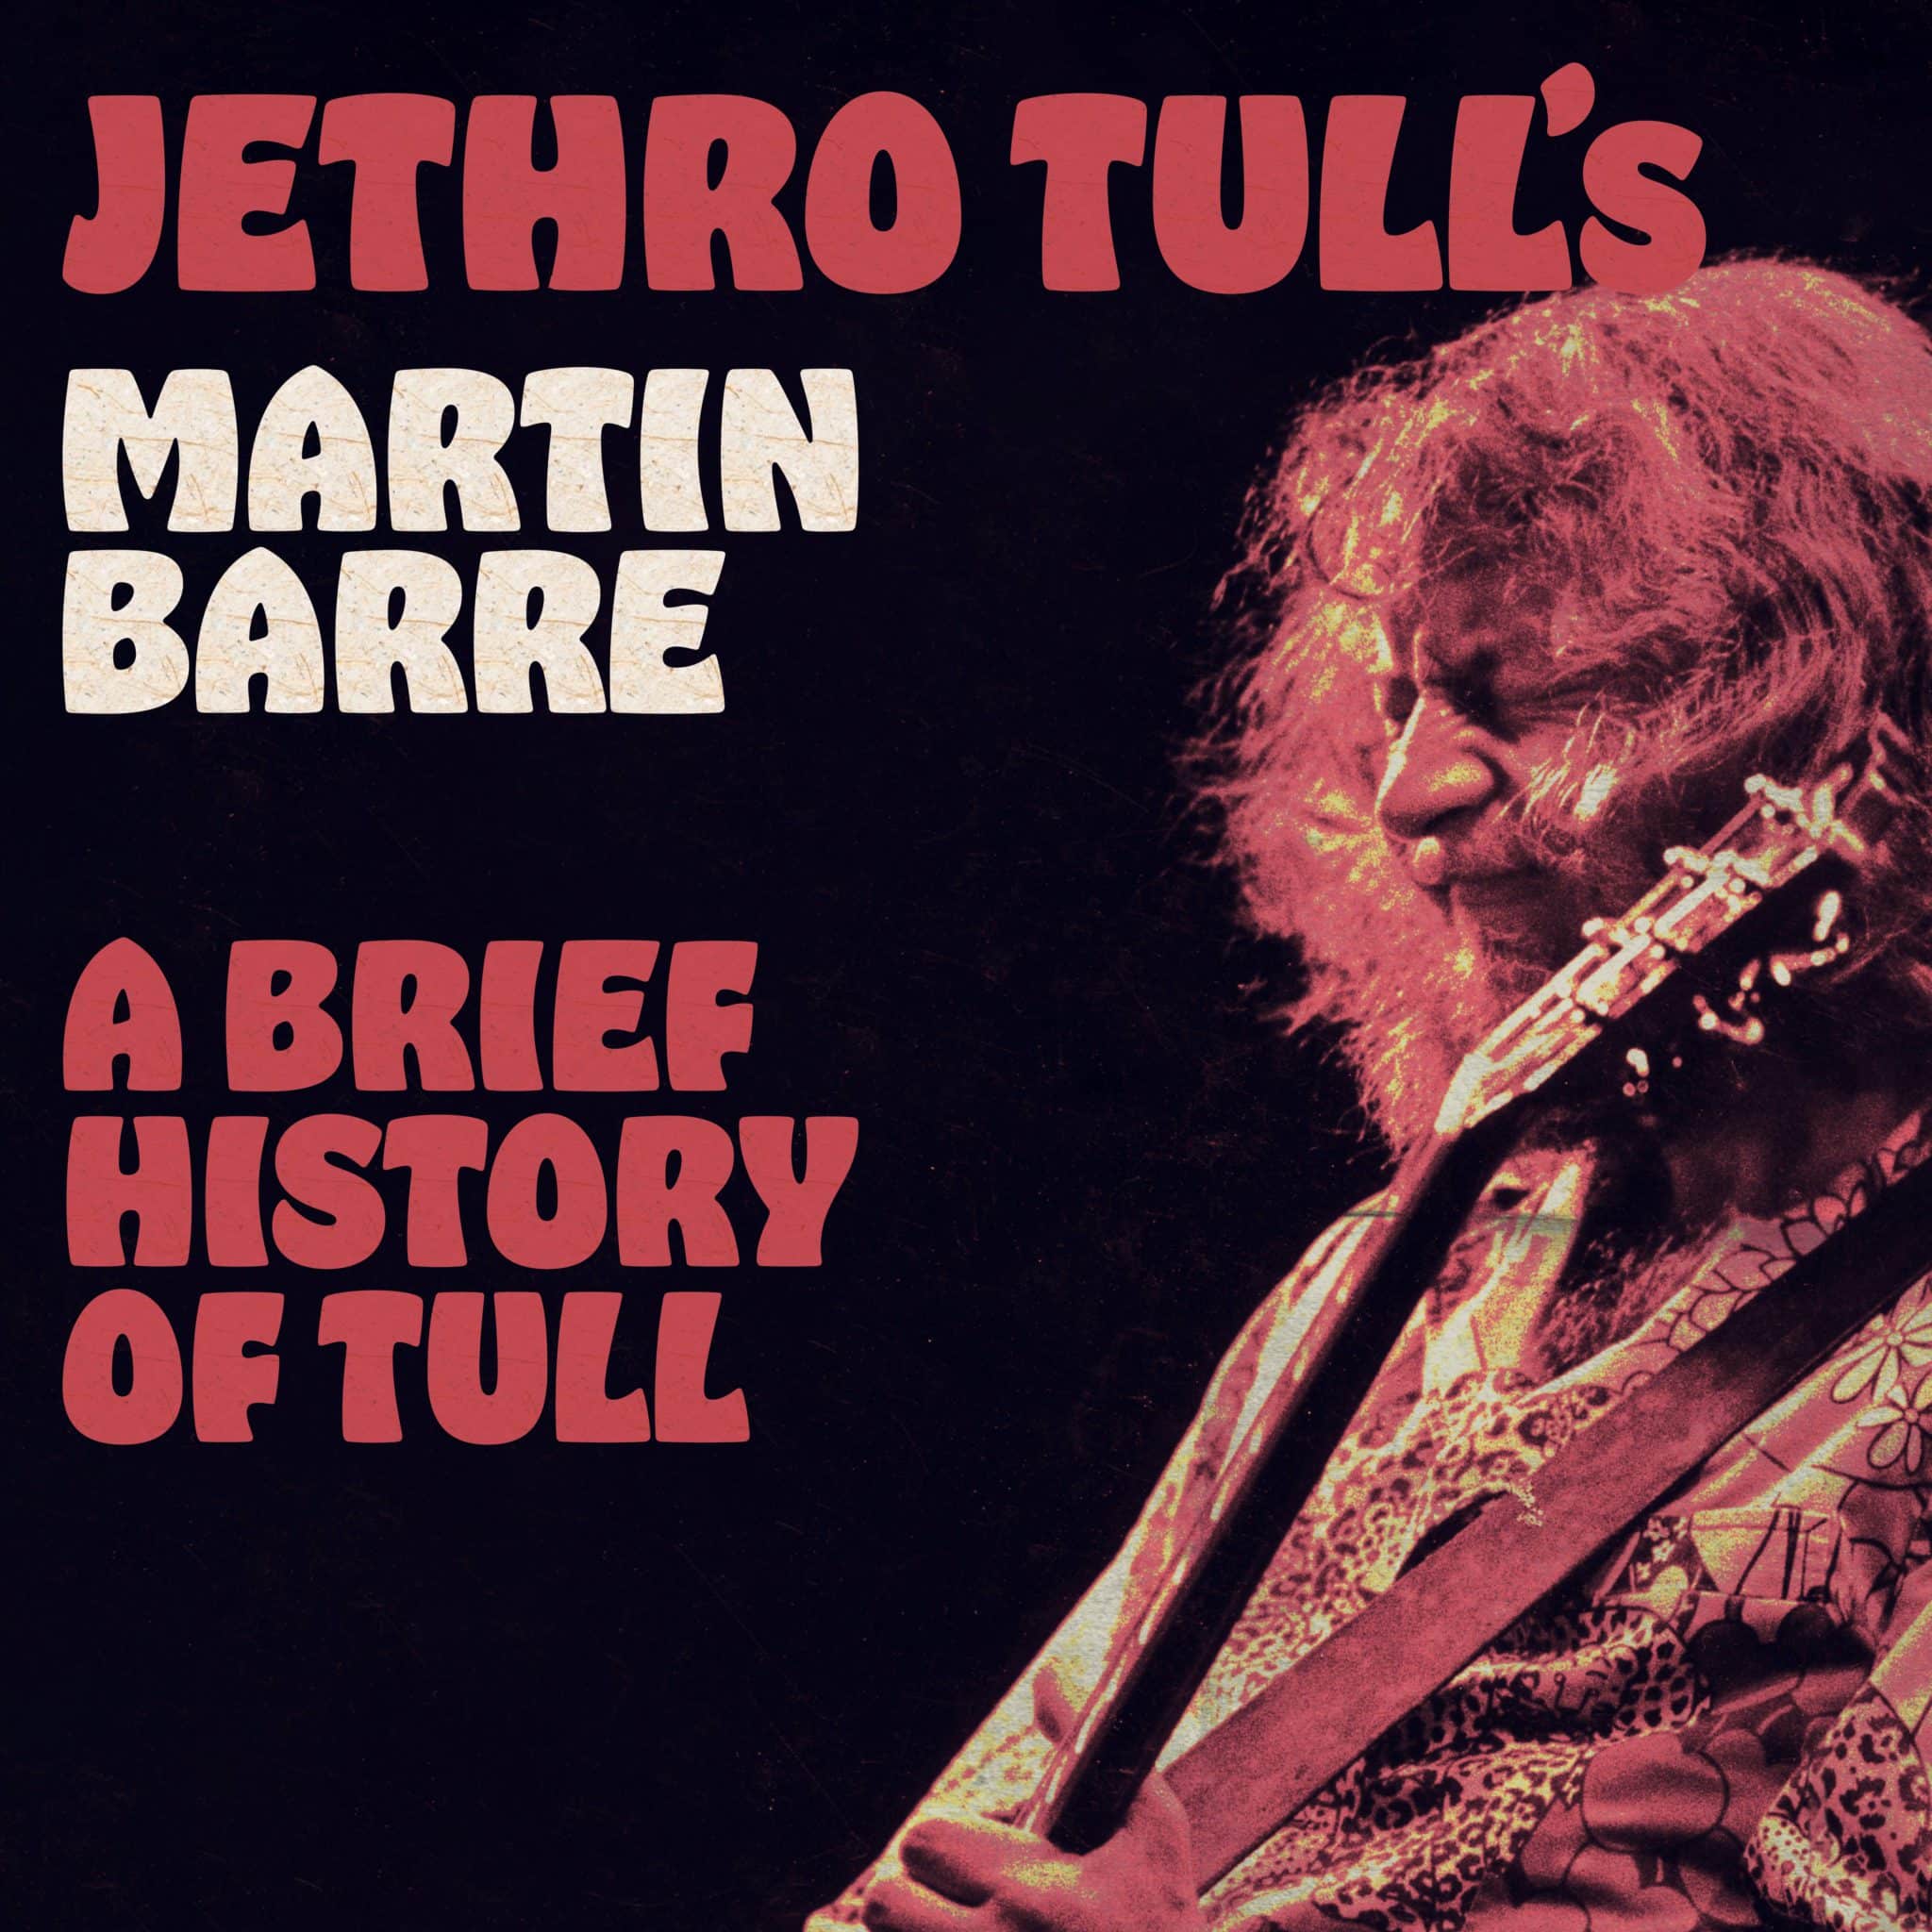 Jethro Tull tour 2023: Where to buy tickets, best prices, dates